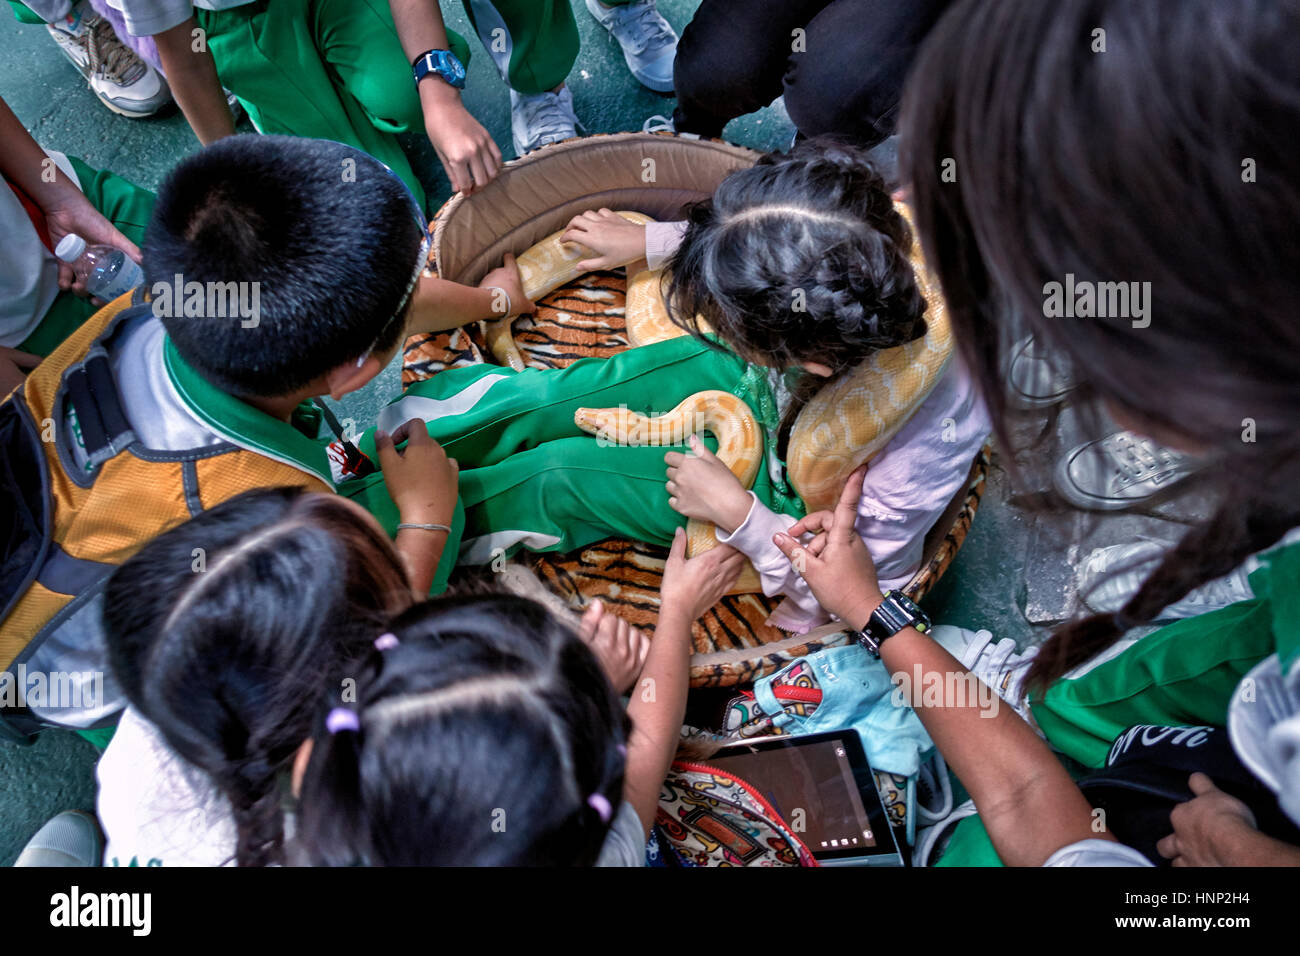 Child snake handling. School children on a scientific nature discovery days outing handling a large Python snake. Thailand, Southeast Asia Stock Photo